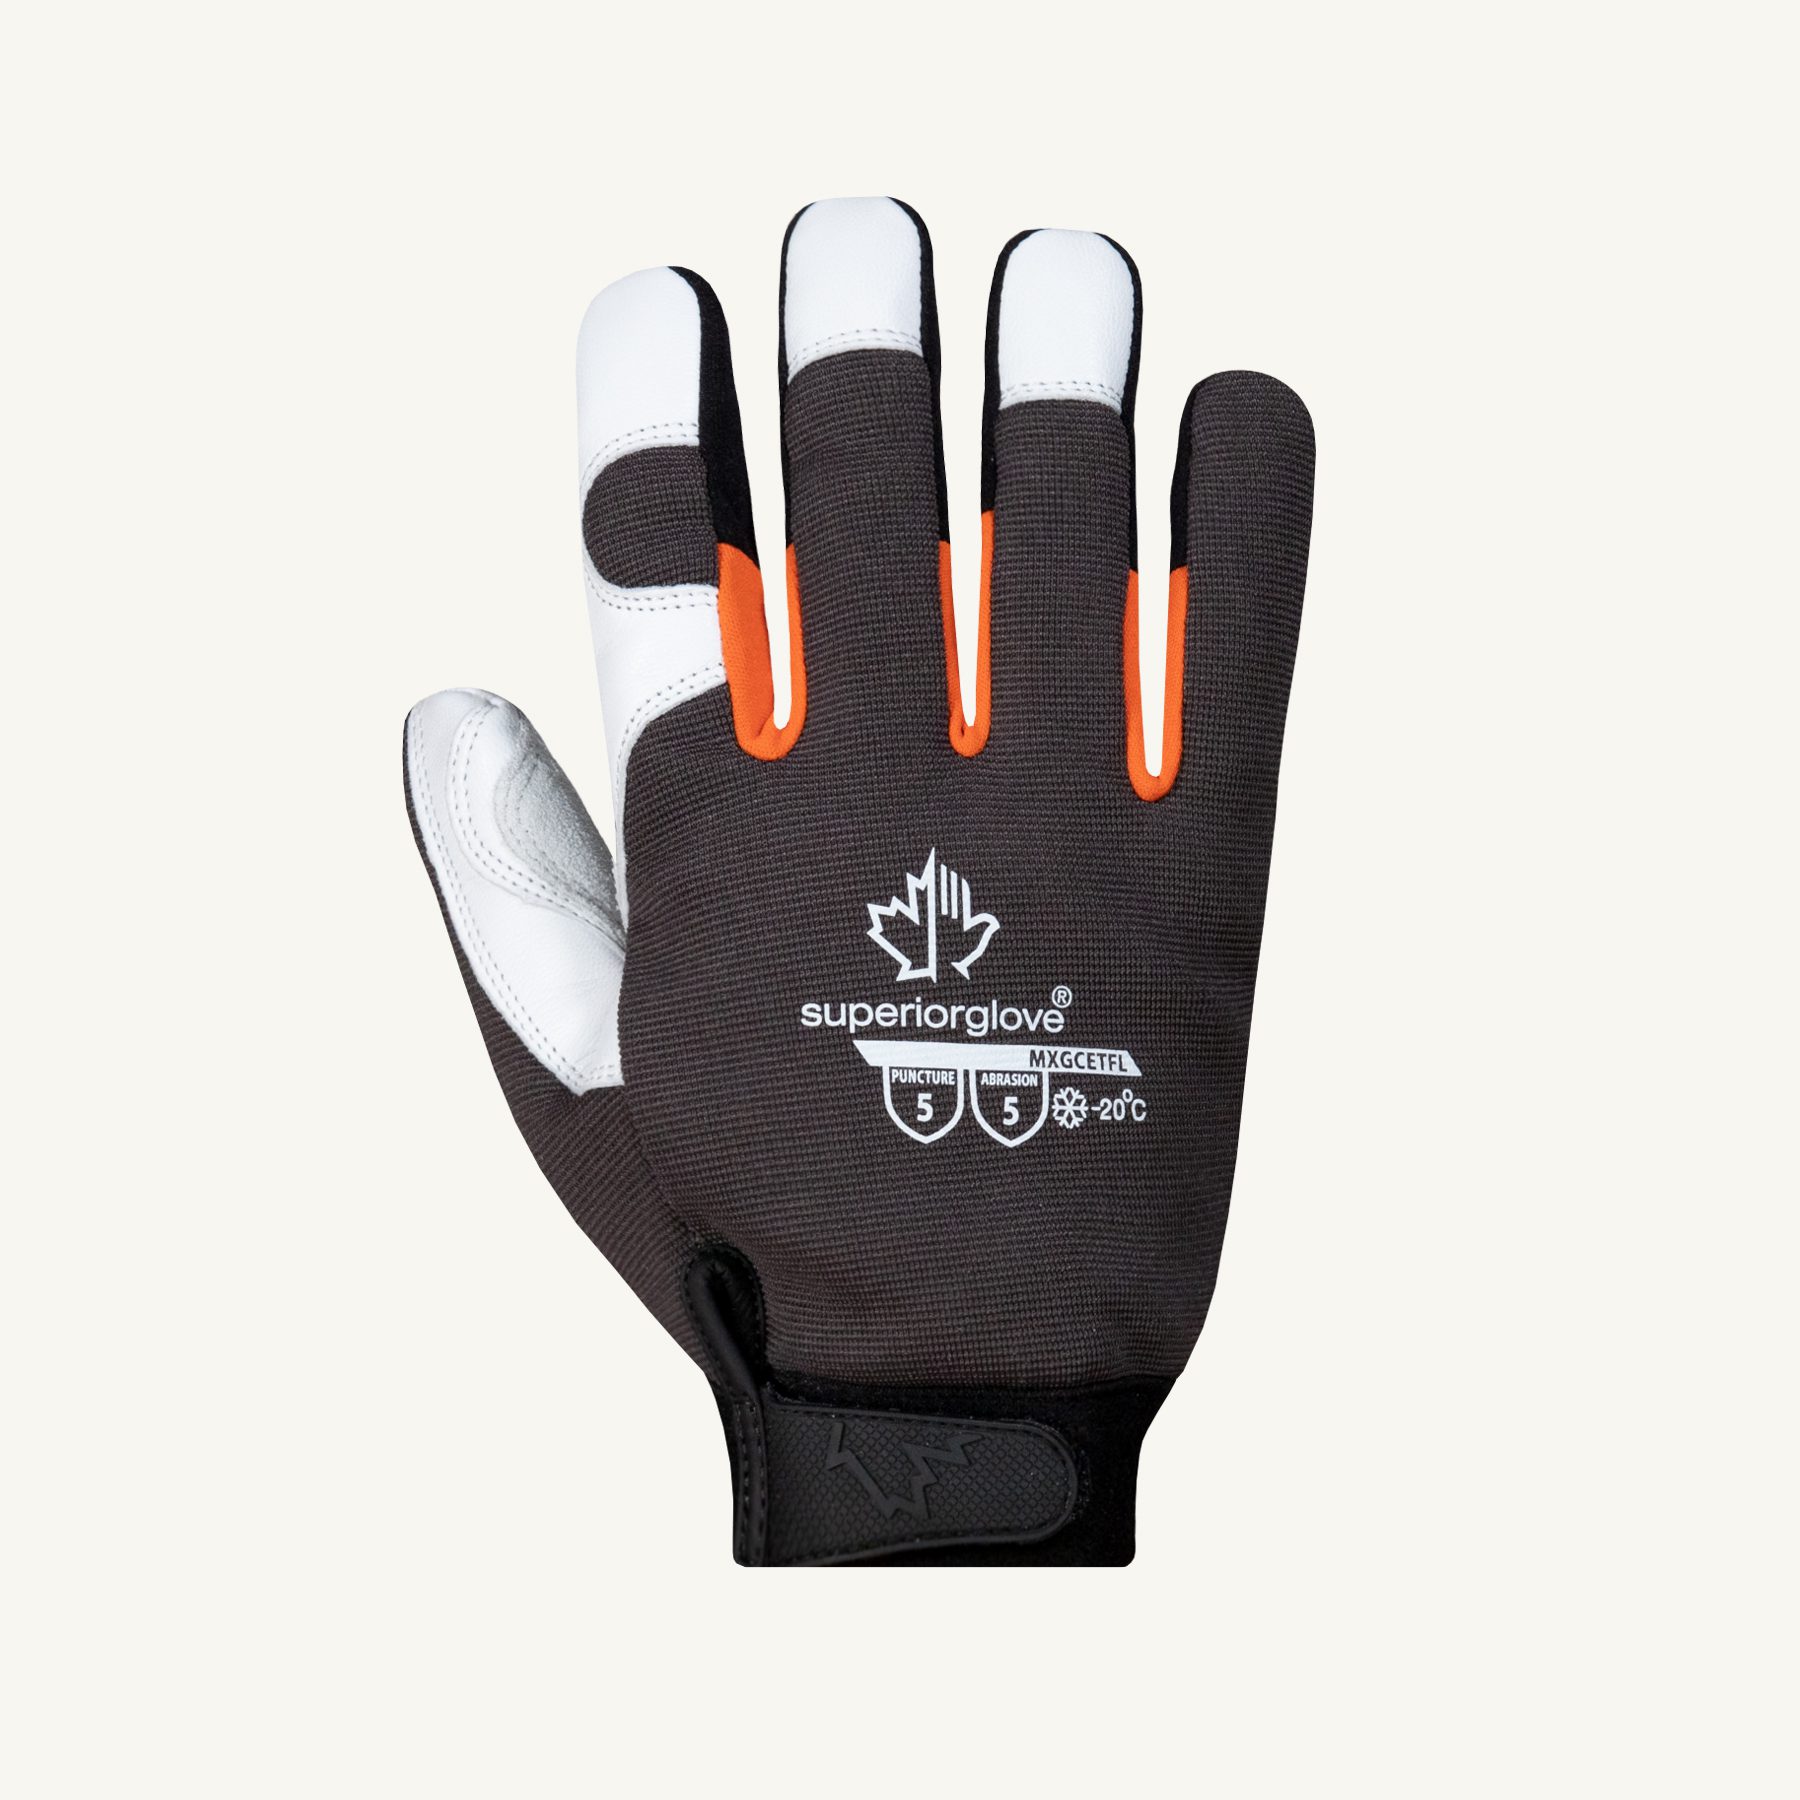 Cut Resistant Leather Drivers Glove - Kevlar Lined Goatskin, 36